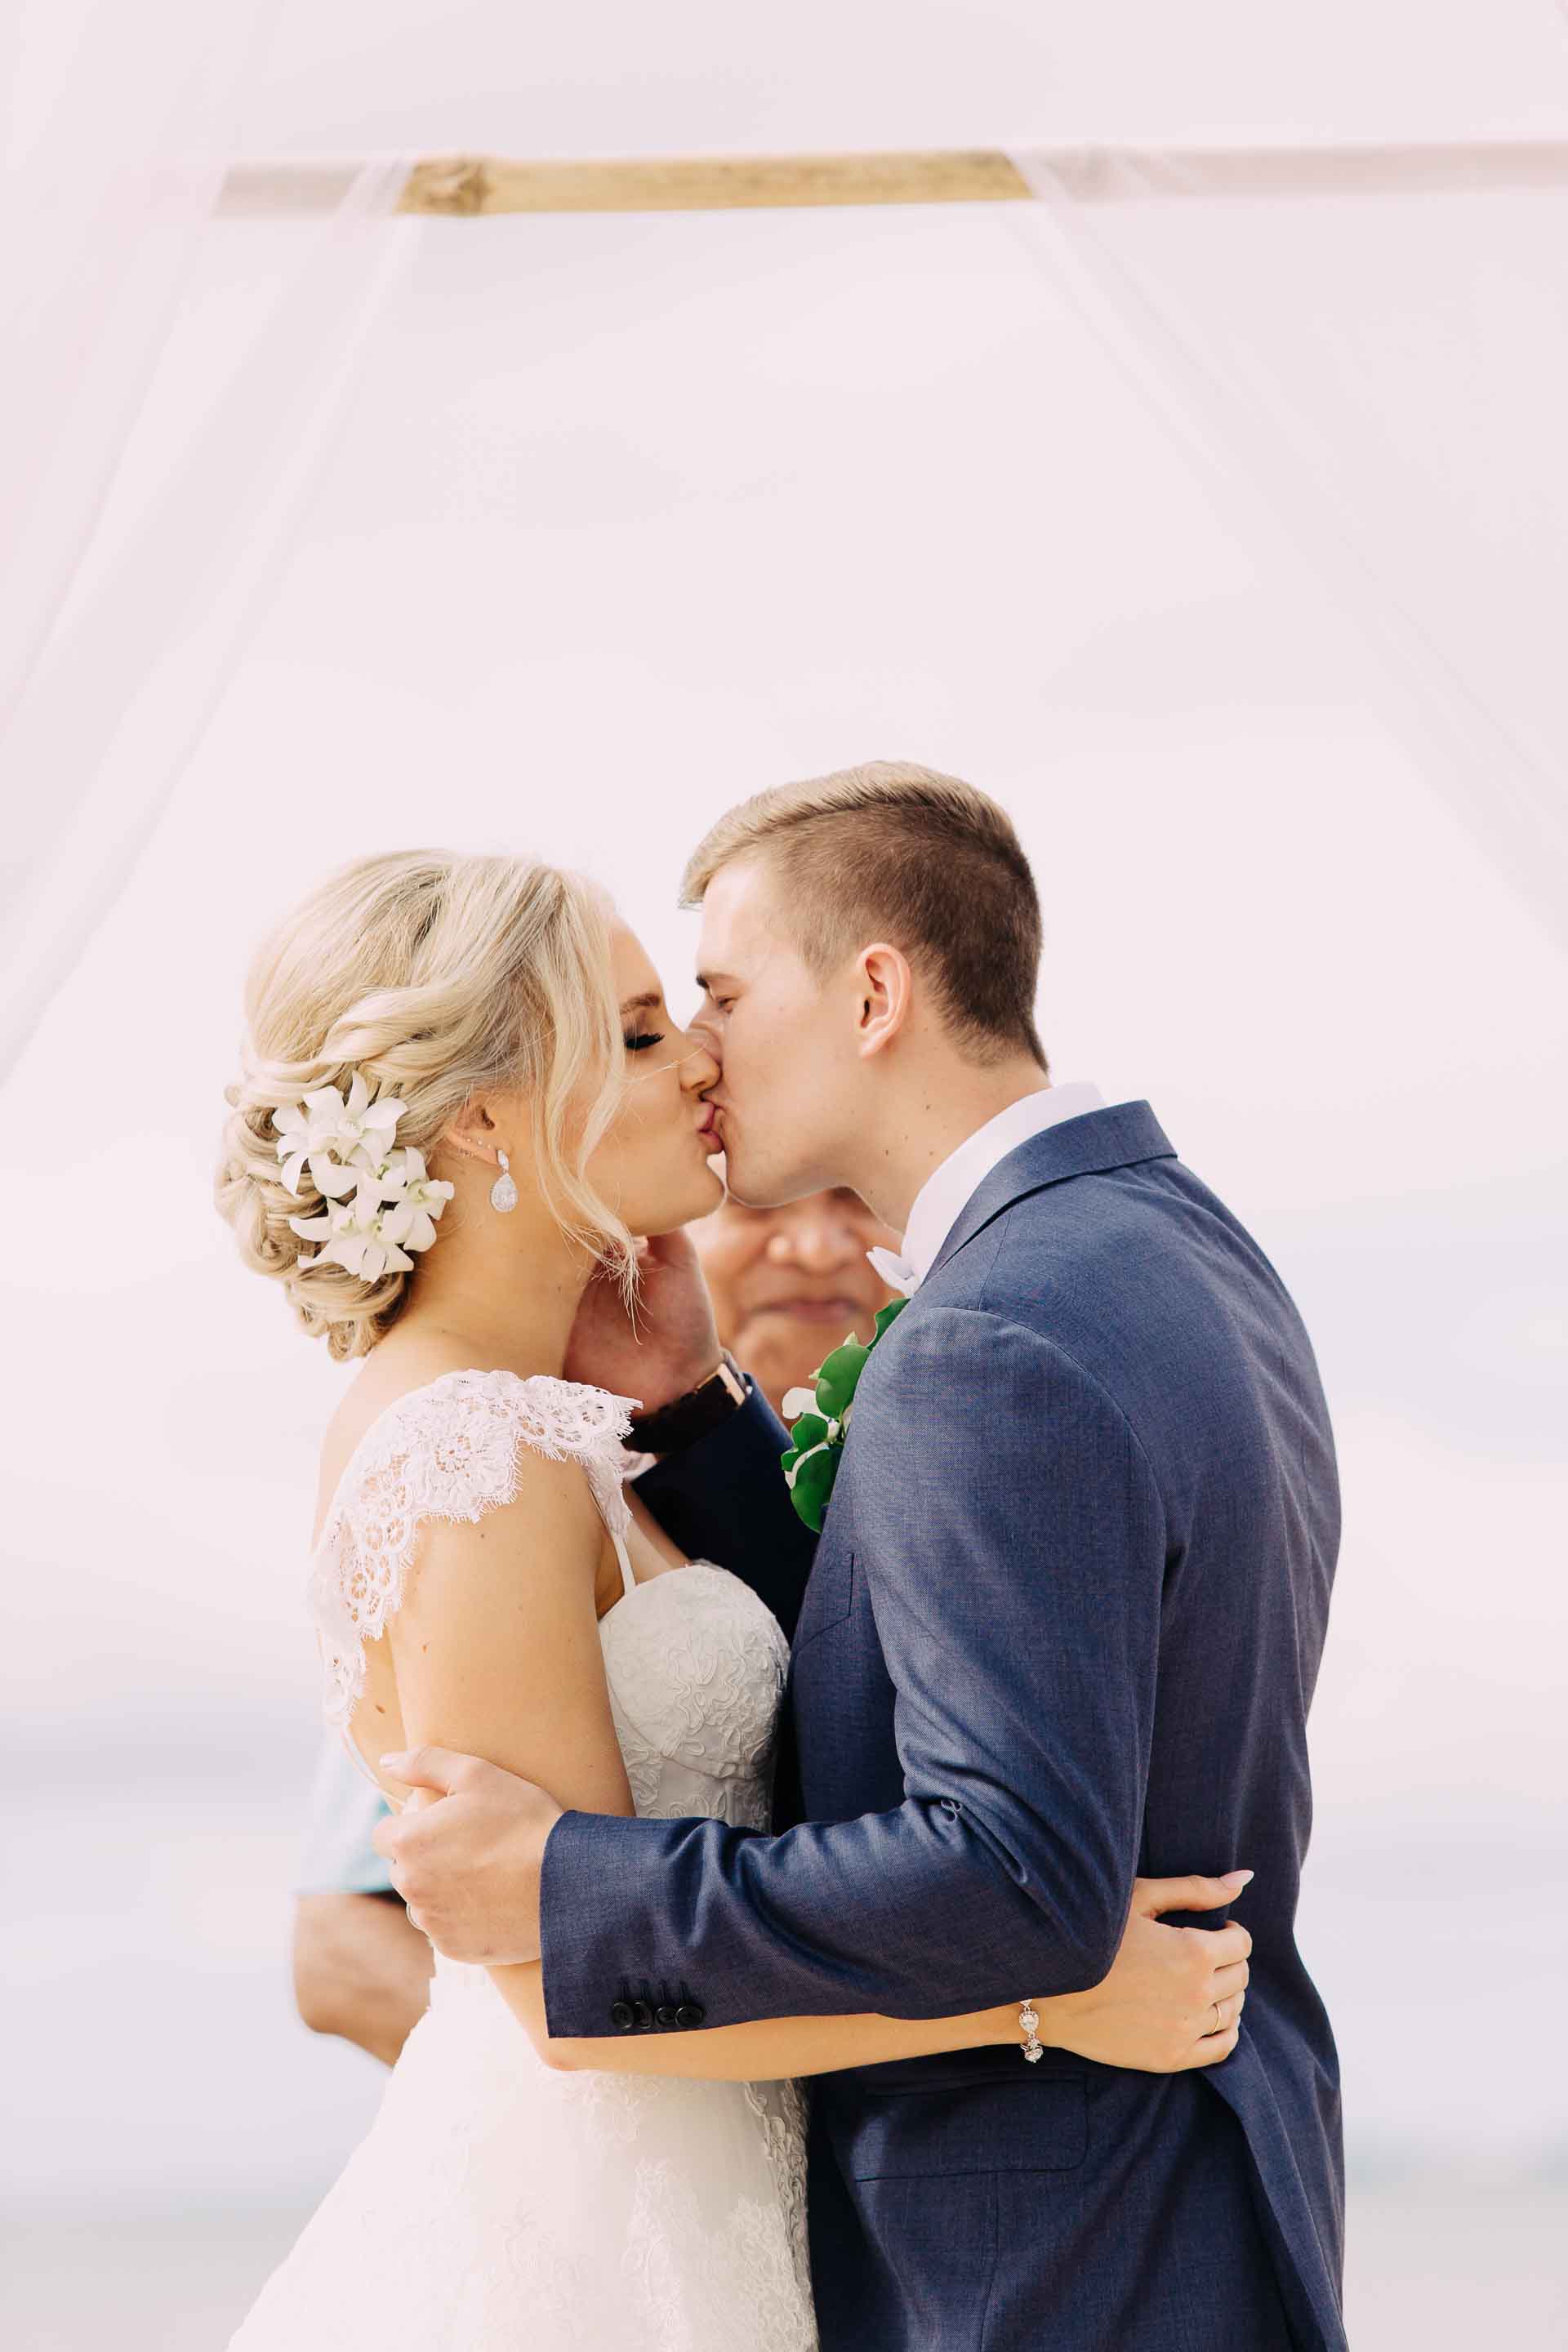 The happy bride and groom have their First Kiss as husband and wife.